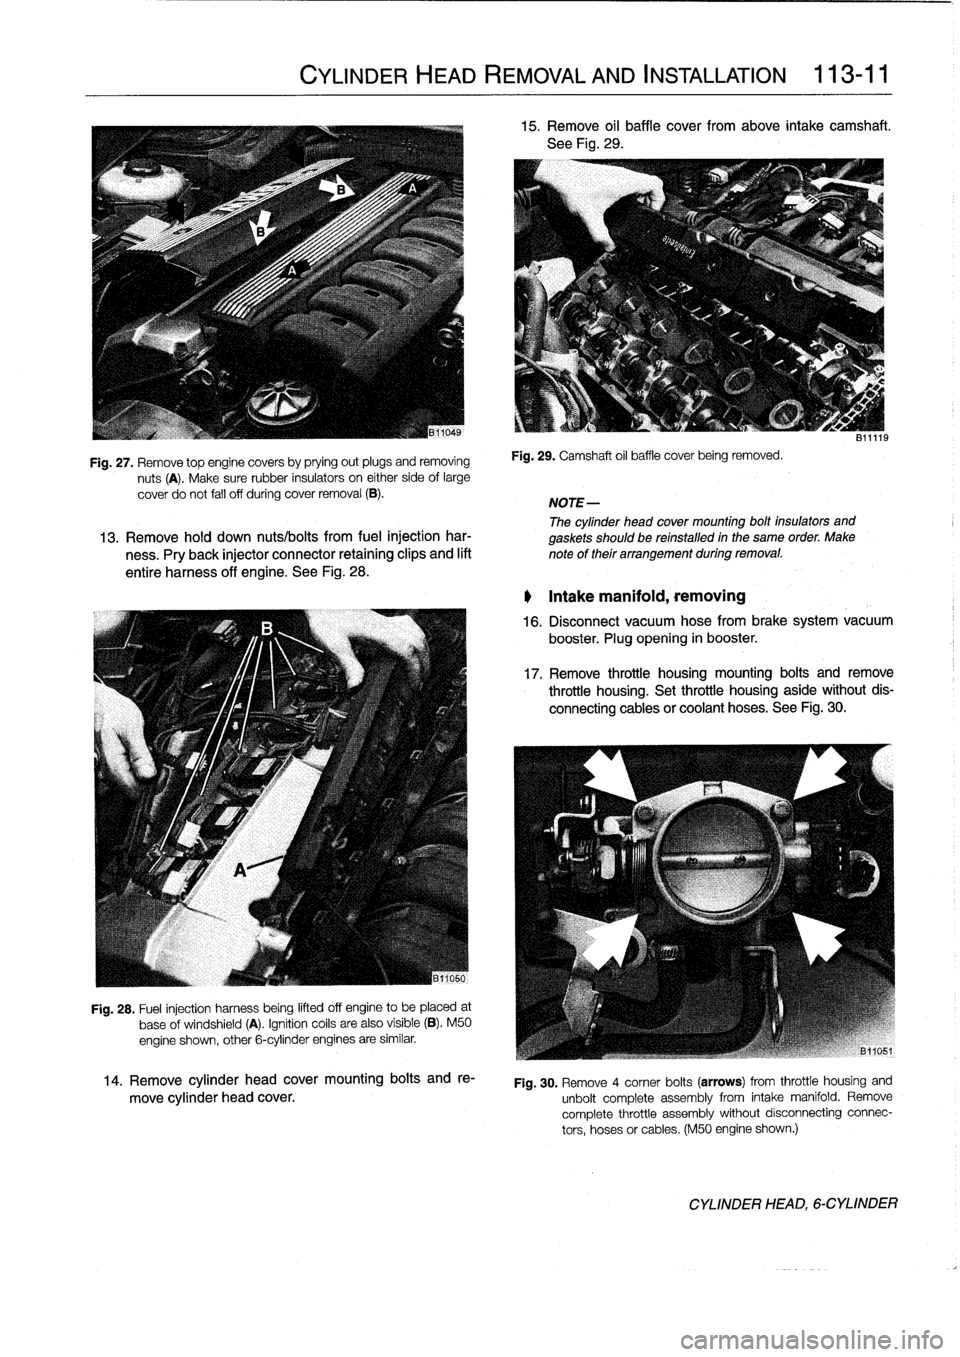 BMW 325i 1997 E36 Workshop Manual 
Fig
.
27
.
Remove
top
enginecovers
by
prying
out
plugs
and
removing

nuts
(A)
.
Make
sure
rubber
insulators
on
either
side
of
large

cover
do
not
fall
off
during
cover
removal
(B)
.

Fig
.
28
.
Fuel
